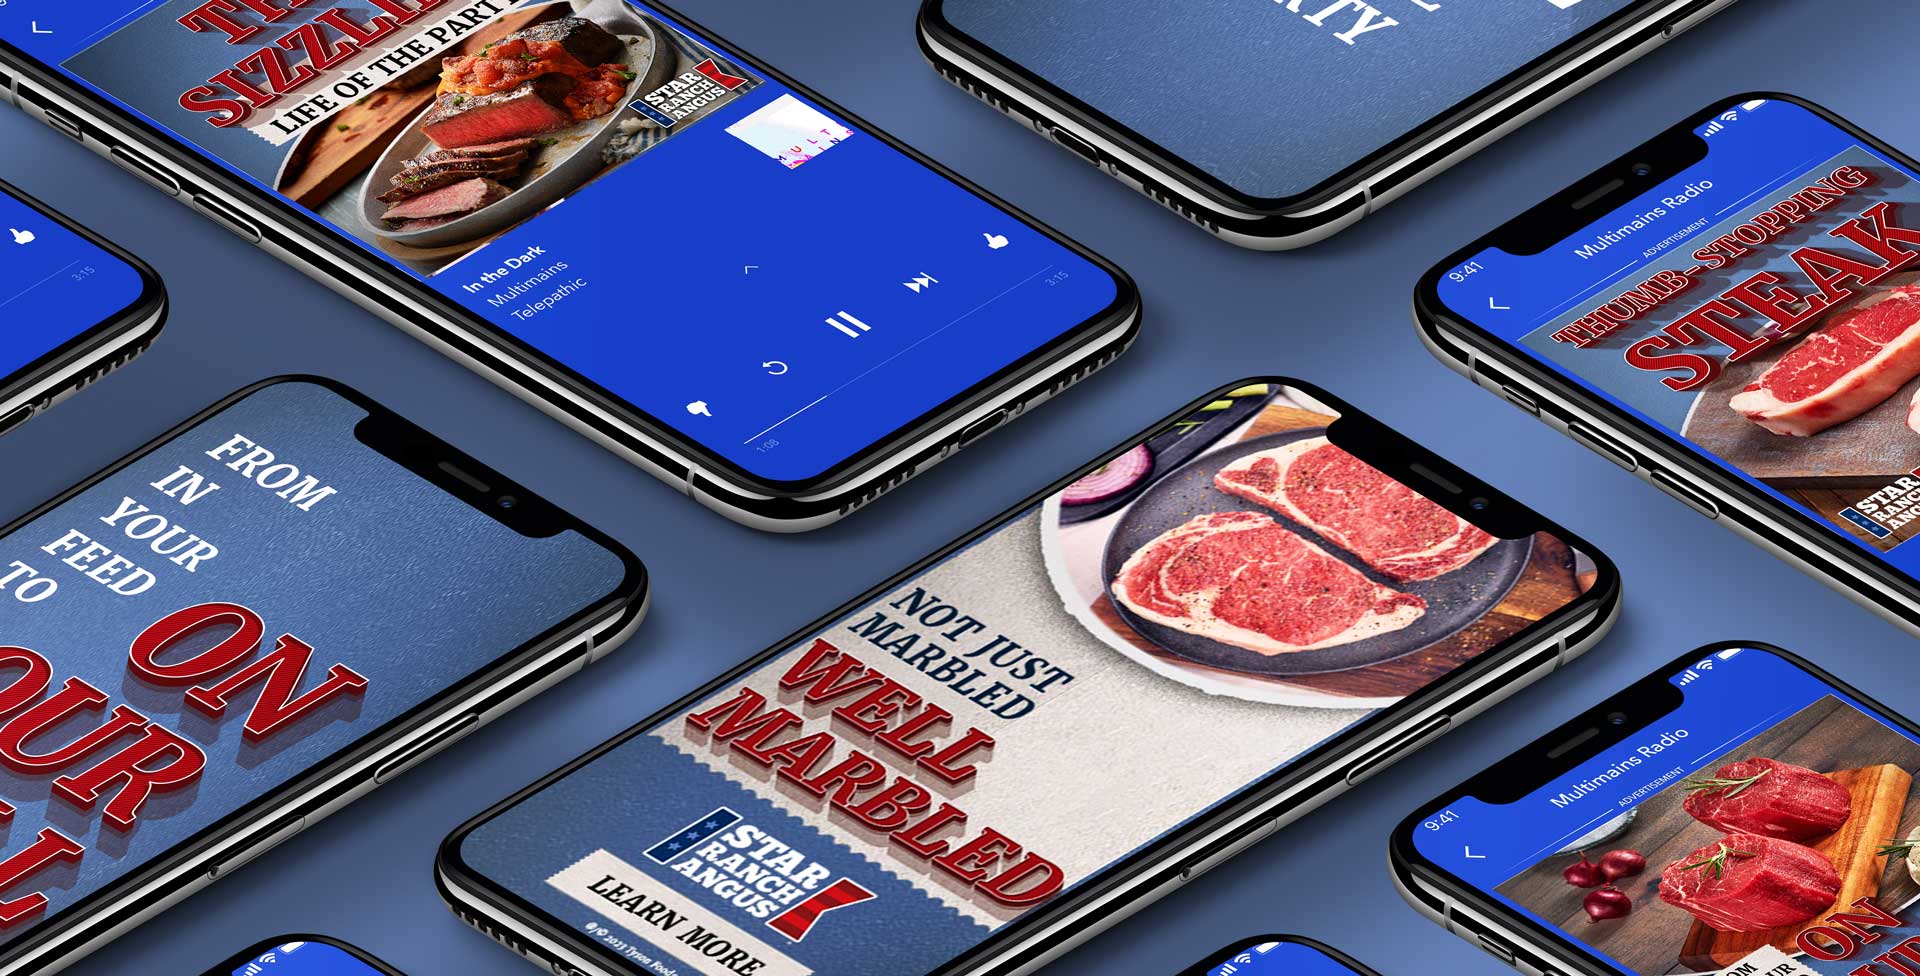 Star Ranch Angus grilling campaign on mobile cell phones